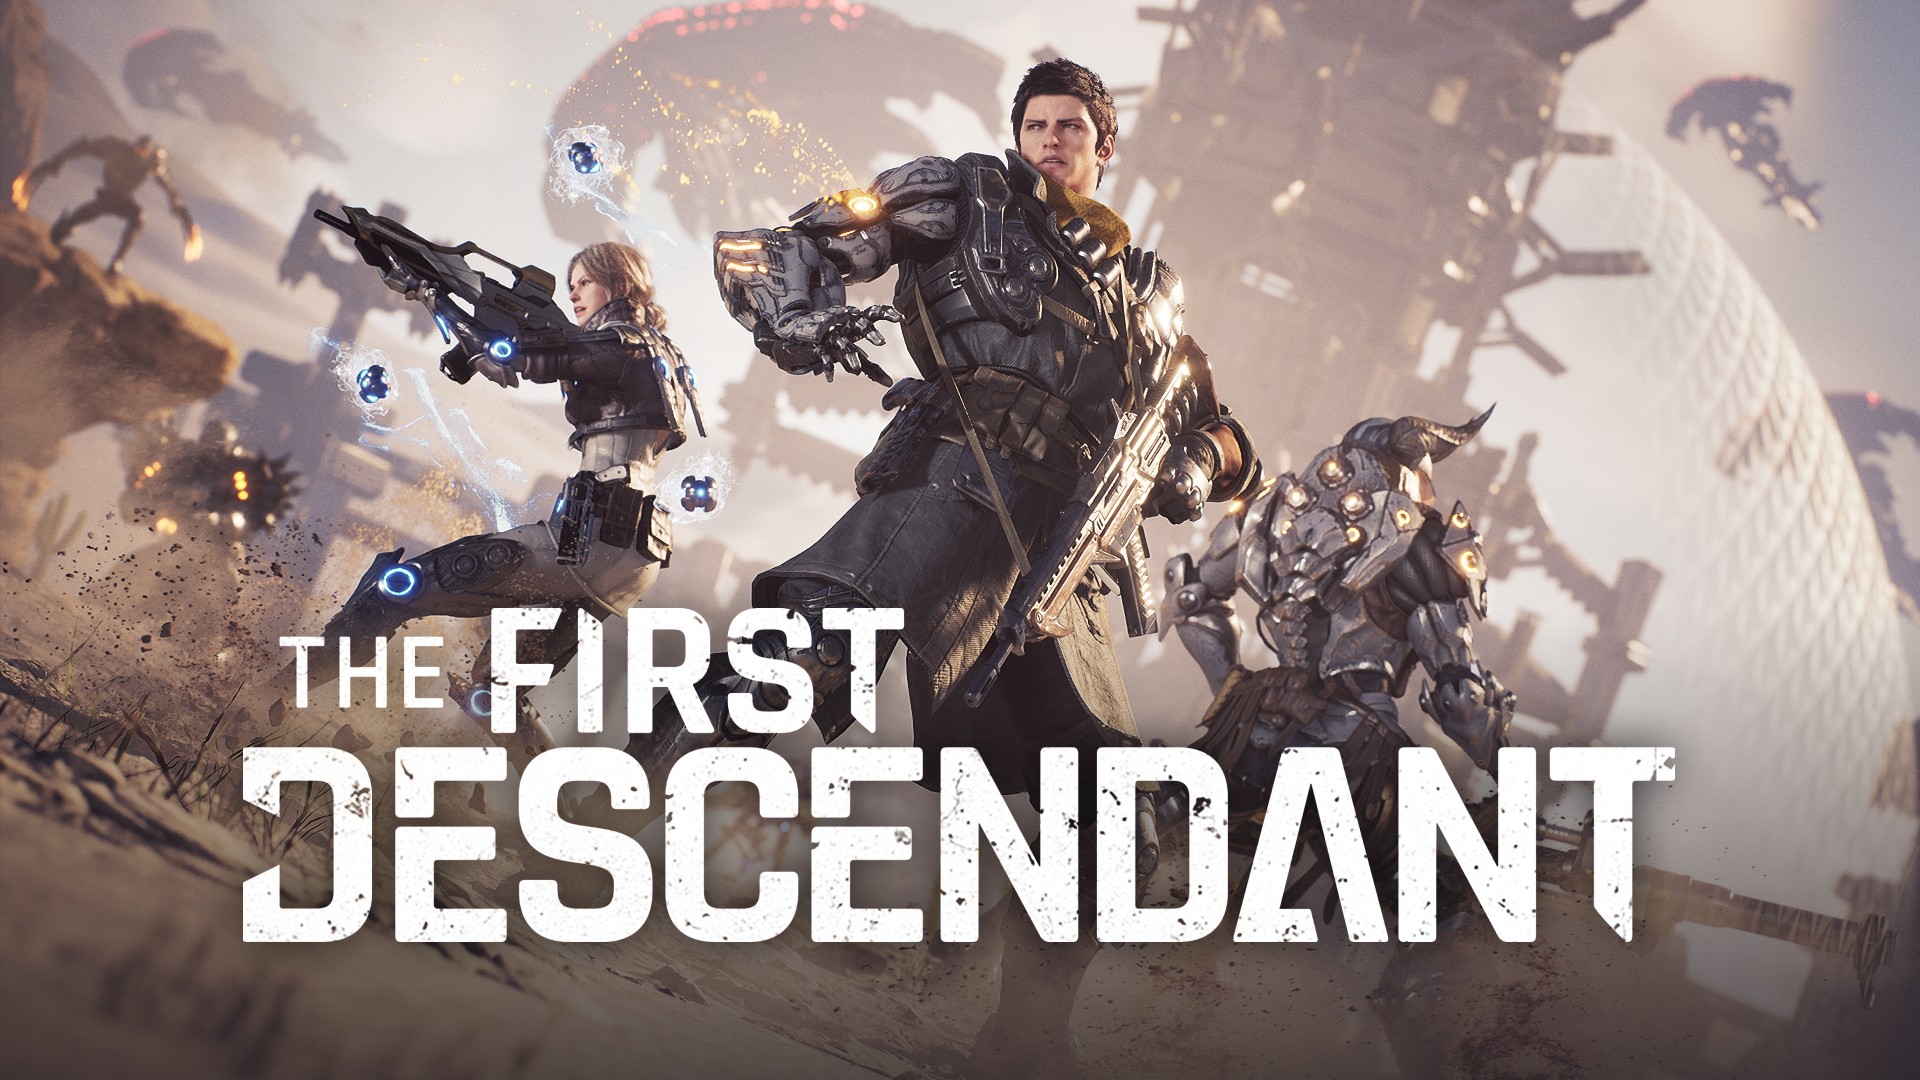 The First Descendant is Out This Fall, Cross-Platform Beta Scheduled for August 22-28